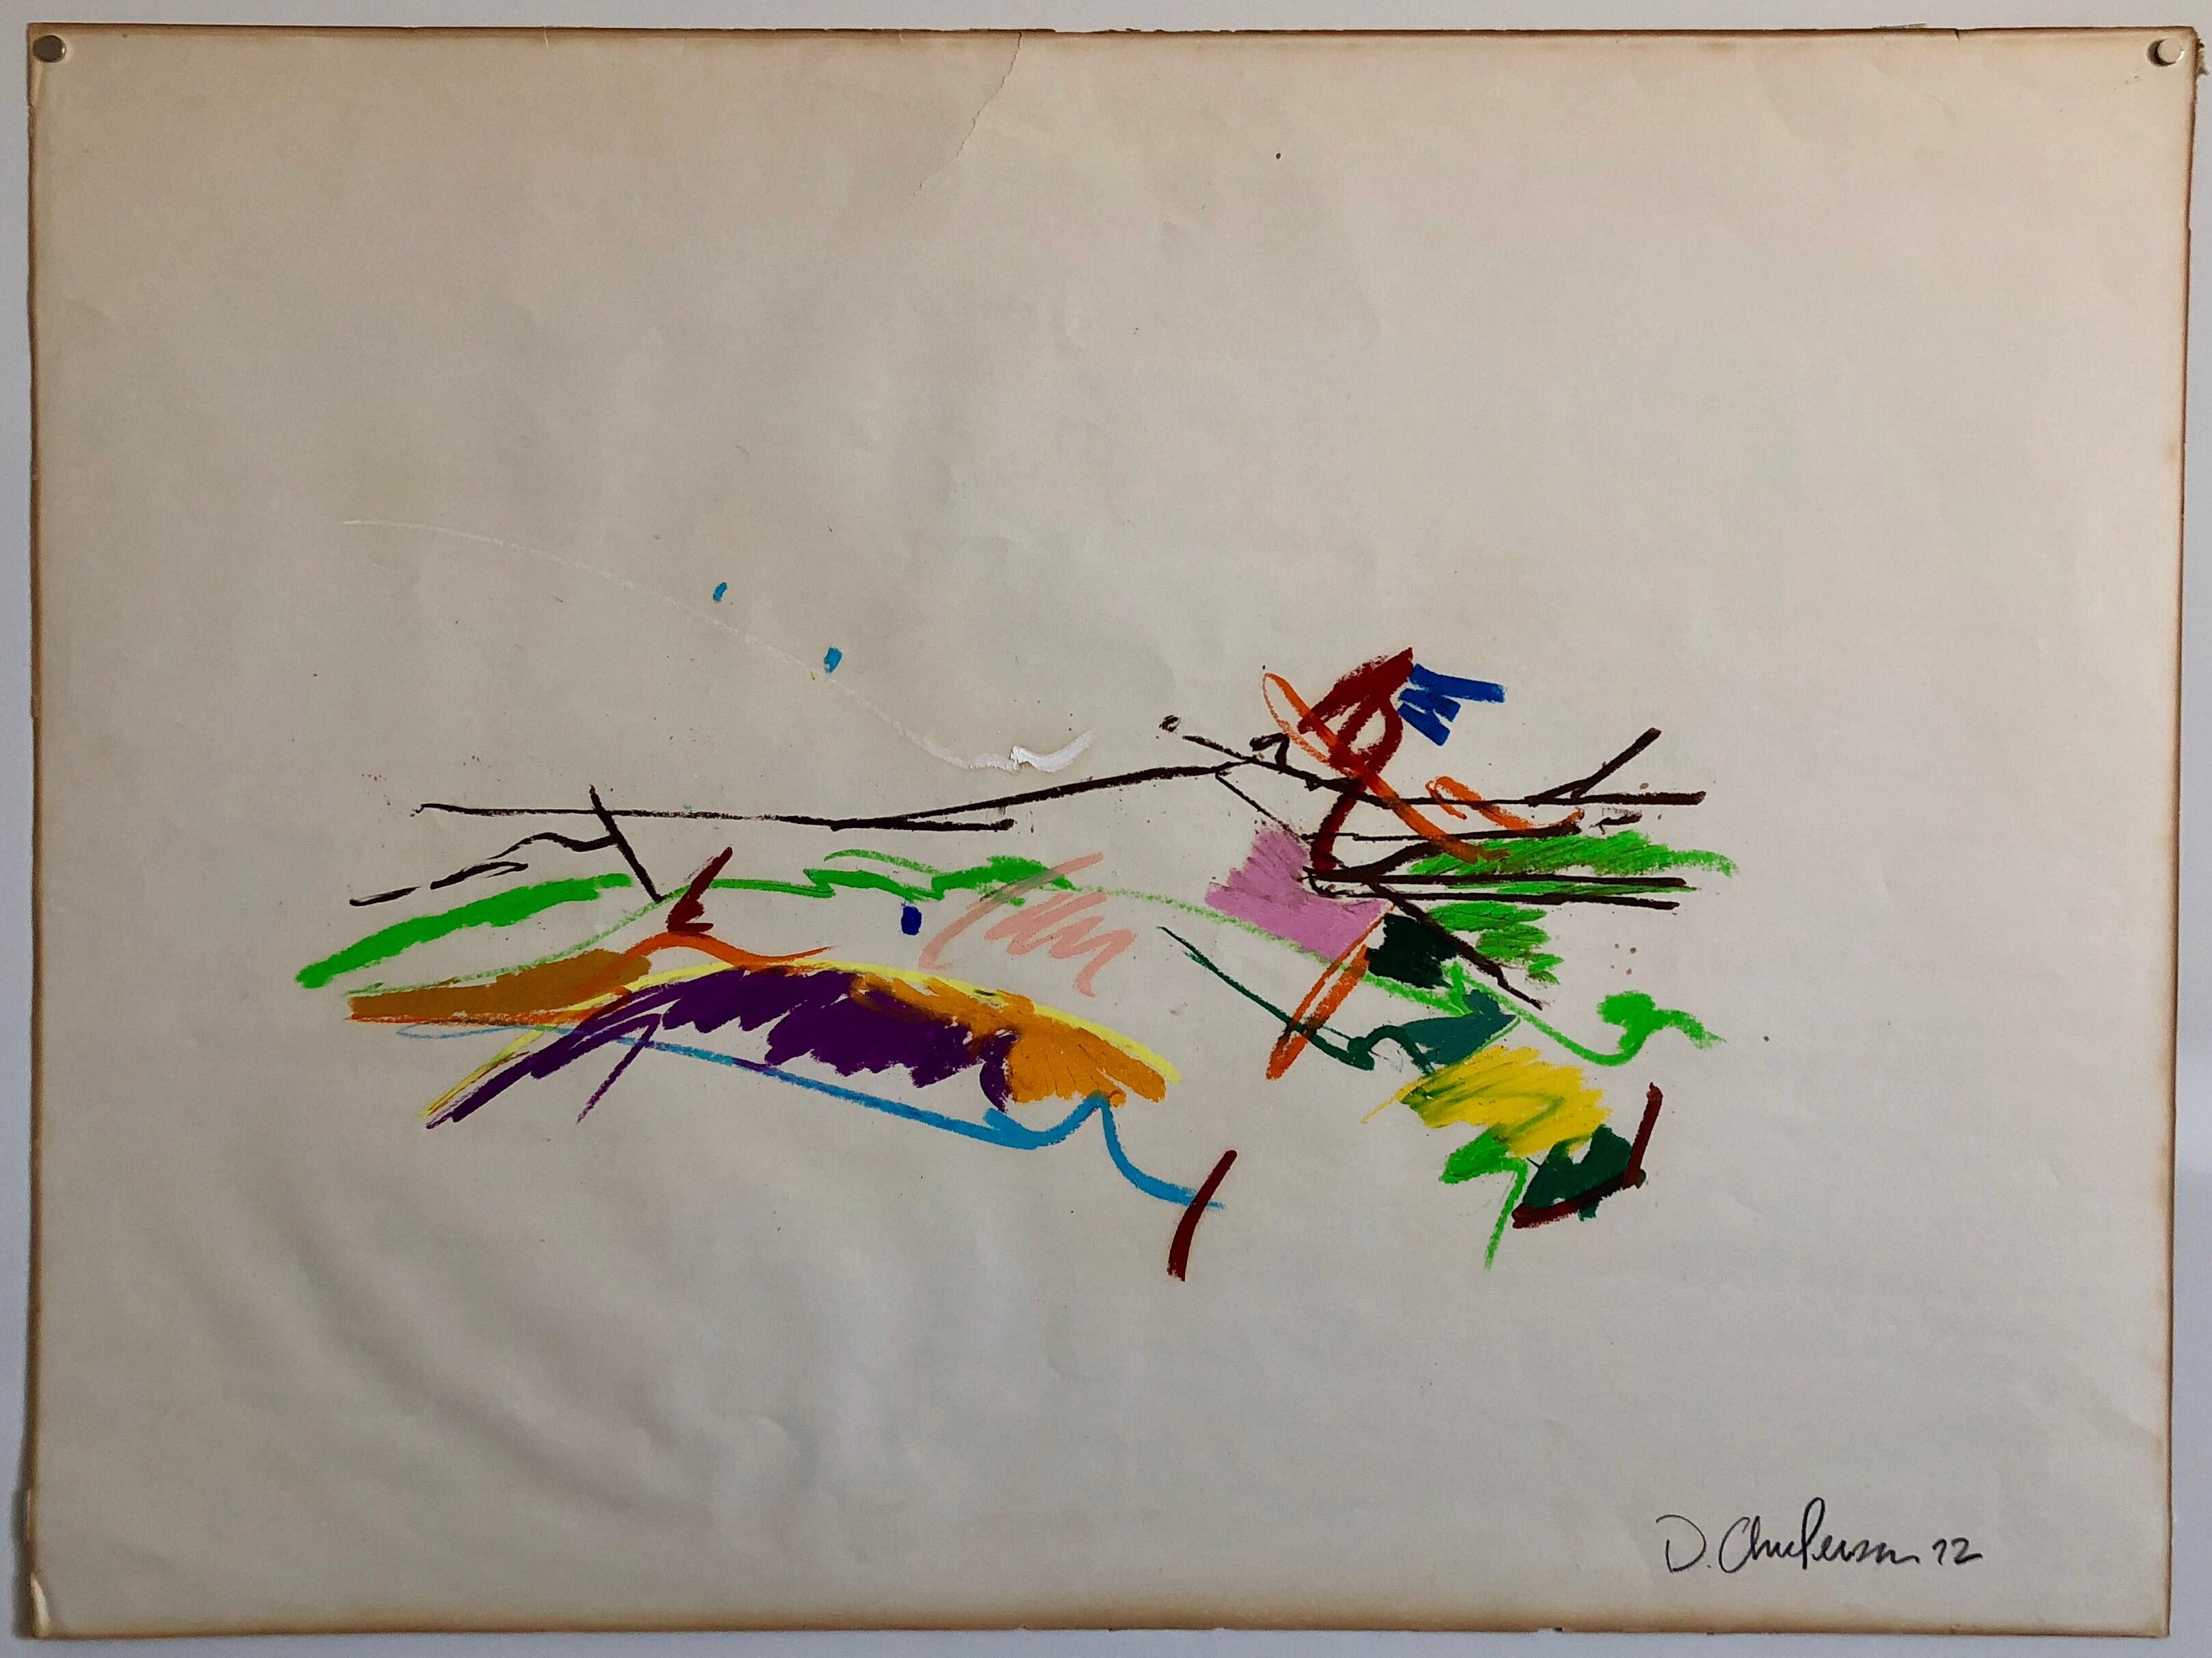 Large bright vivid drawing done in oil crayon or oil pastel. Abstract floral drawing. 

David Kimball Anderson’s work is bold and graceful, respectful and spiritual. A practicing Buddhist and avid surfer as well as a sculptor, Anderson has given way